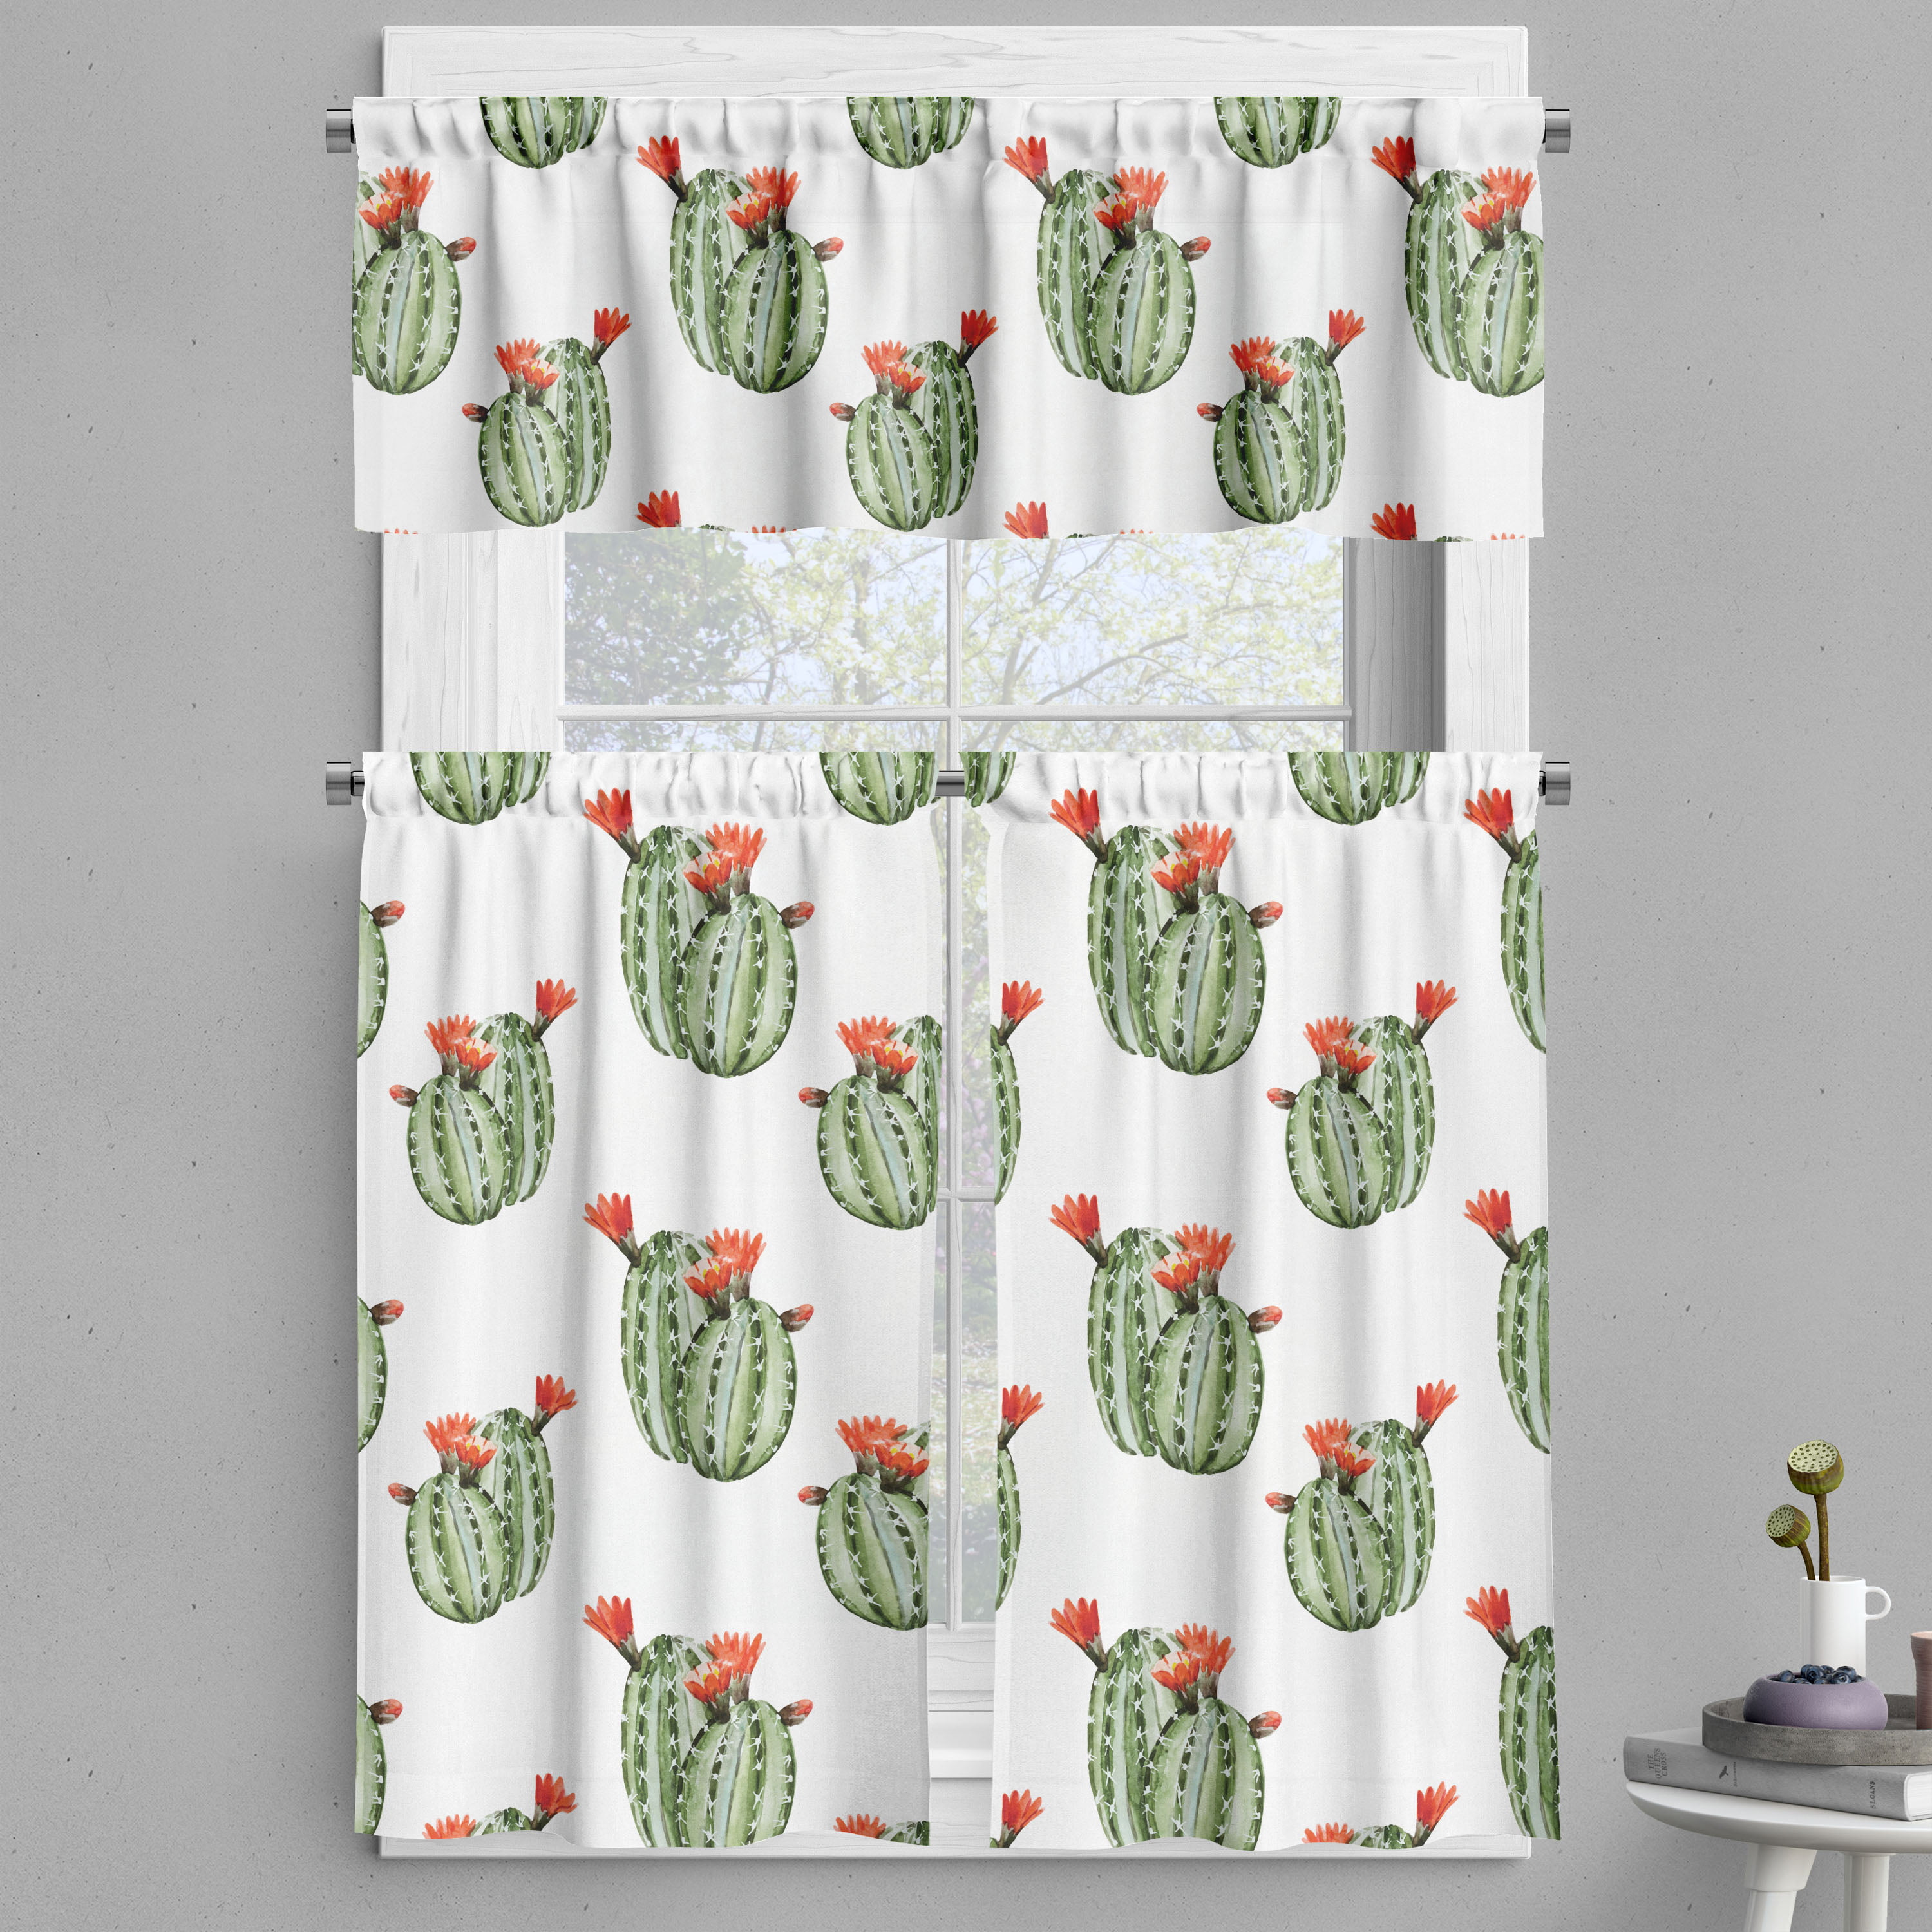 Cactus Valance & Tier Curtain 3 pcs Set, Cacti Spikes and Red Flowers ...